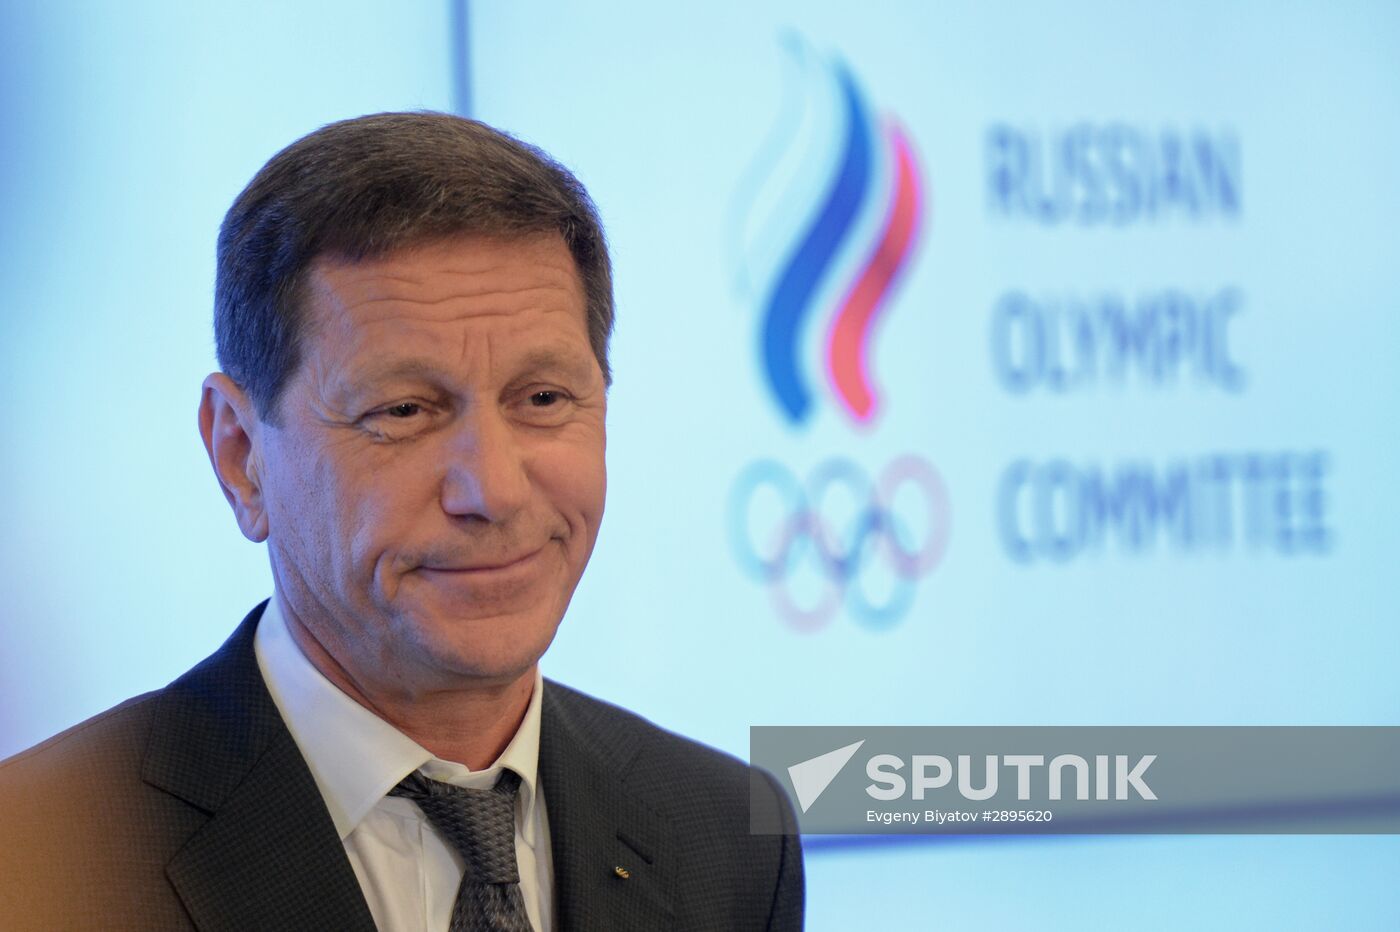 Russian Olympic Committee's Executive Committee meeting